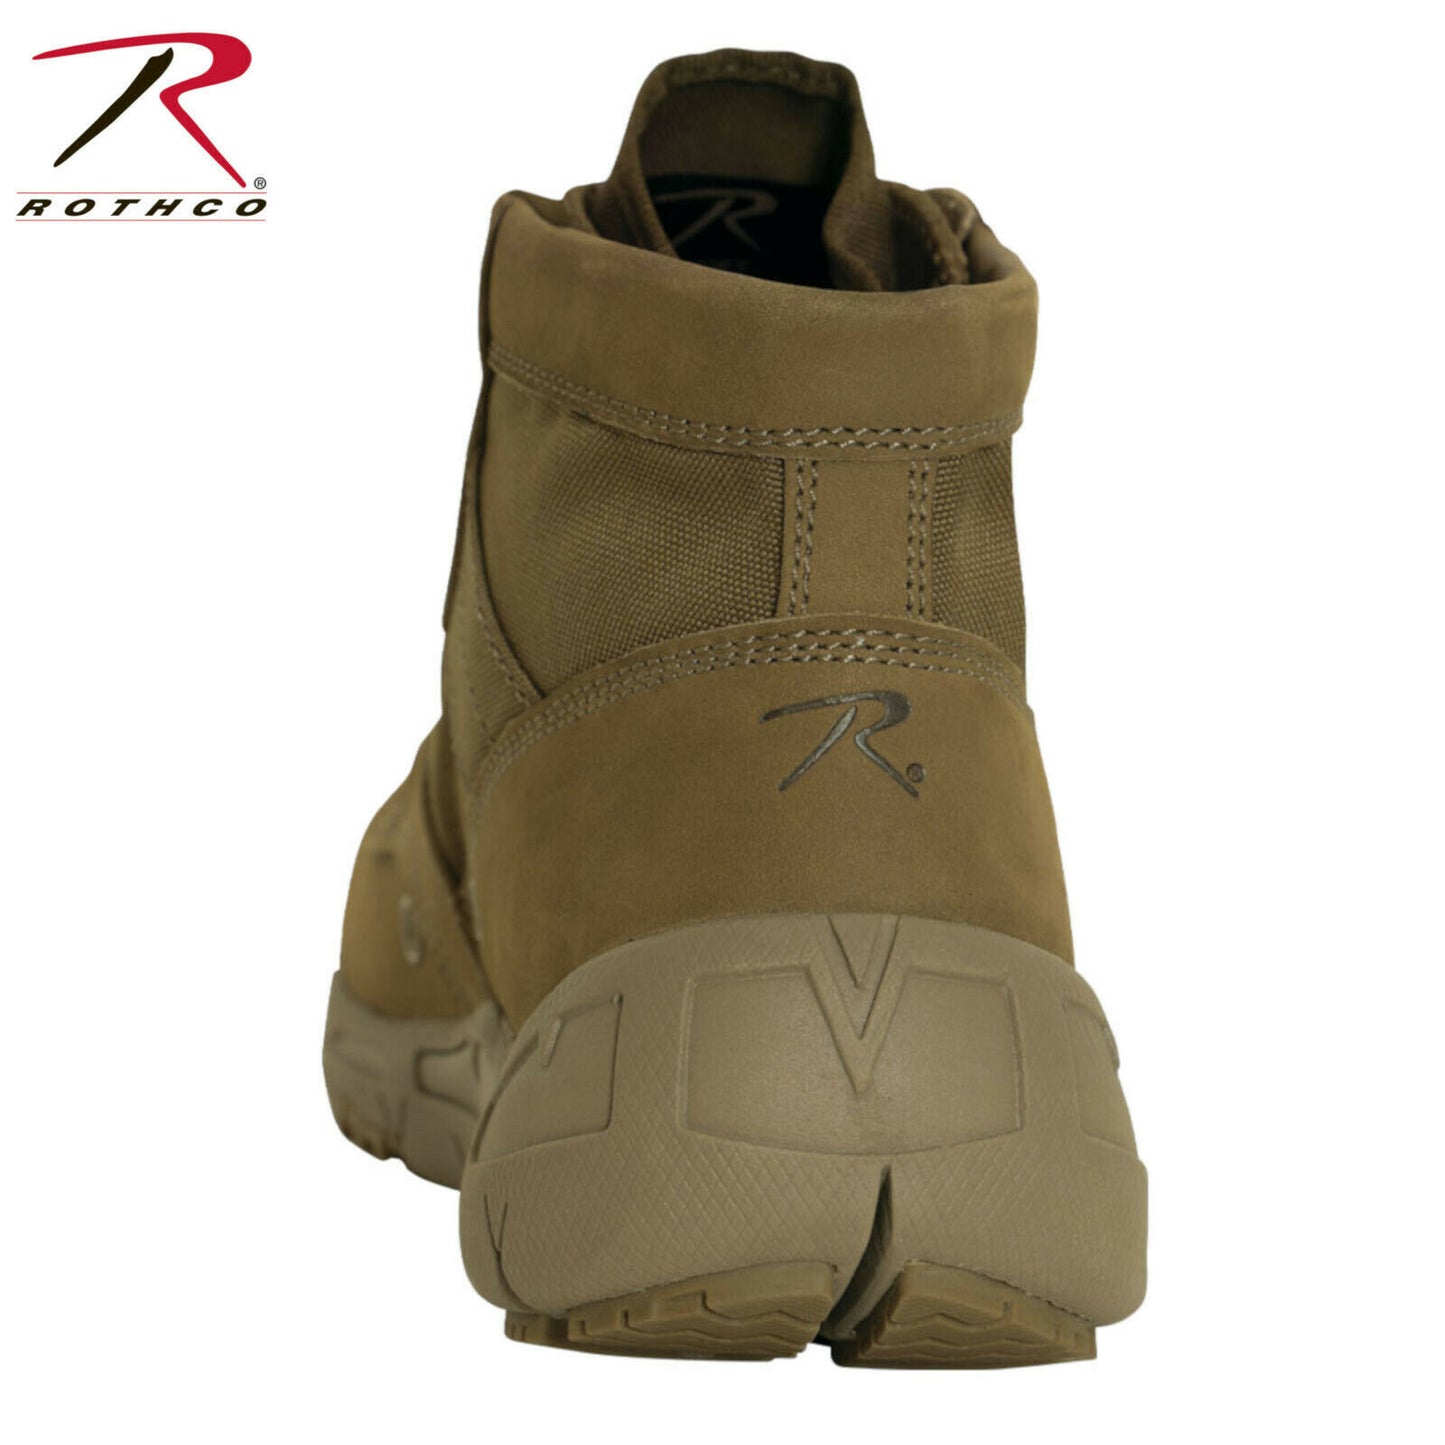 Rothco AR 670-1 Coyote Brown 6 Inch V-Max Lightweight Tactical All Purpose Boot